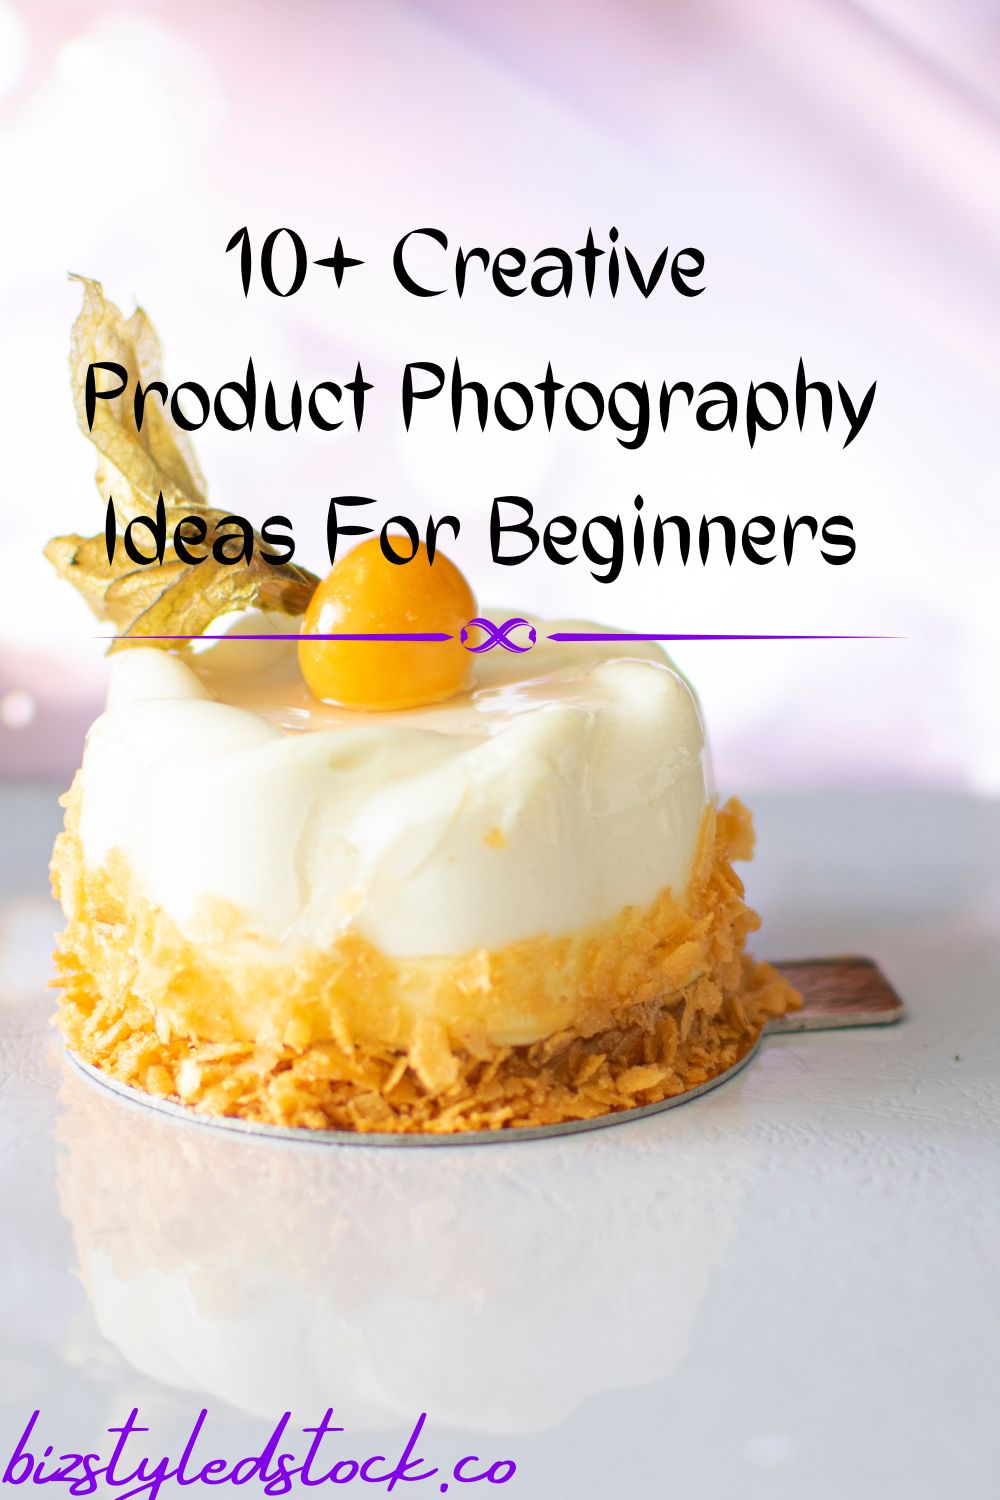 10+ Creative Product Photography Ideas For Beginners pin